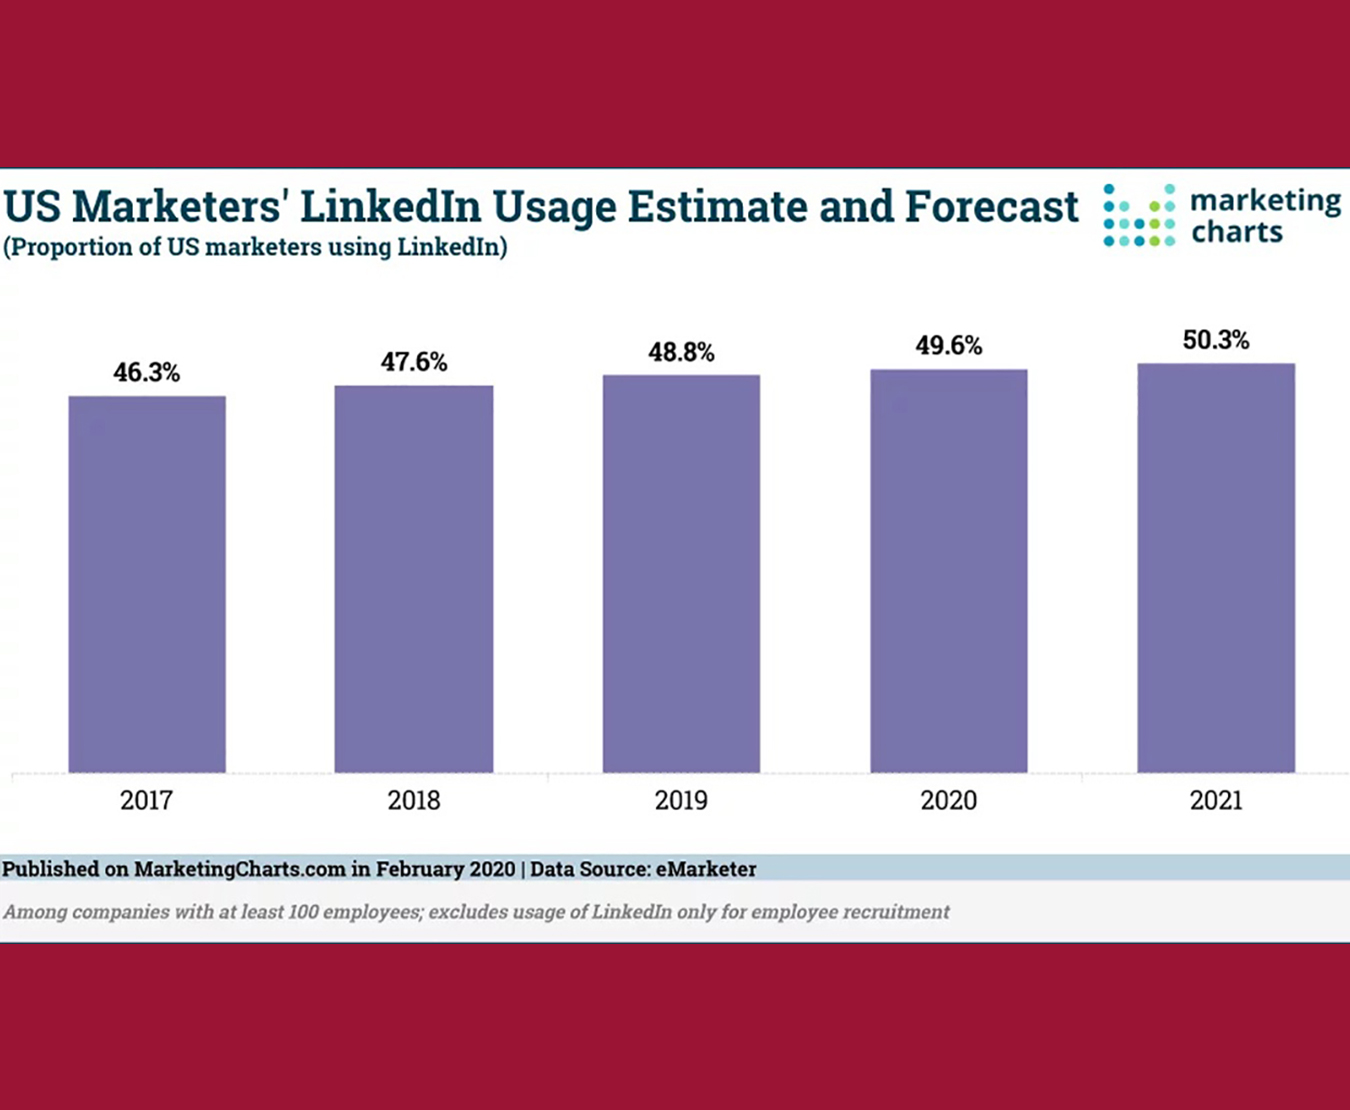 US Marketers' LinkedIn Usage Forecast shows rising use. 50.3% planned to use LinkedIn content marketing in 2021.